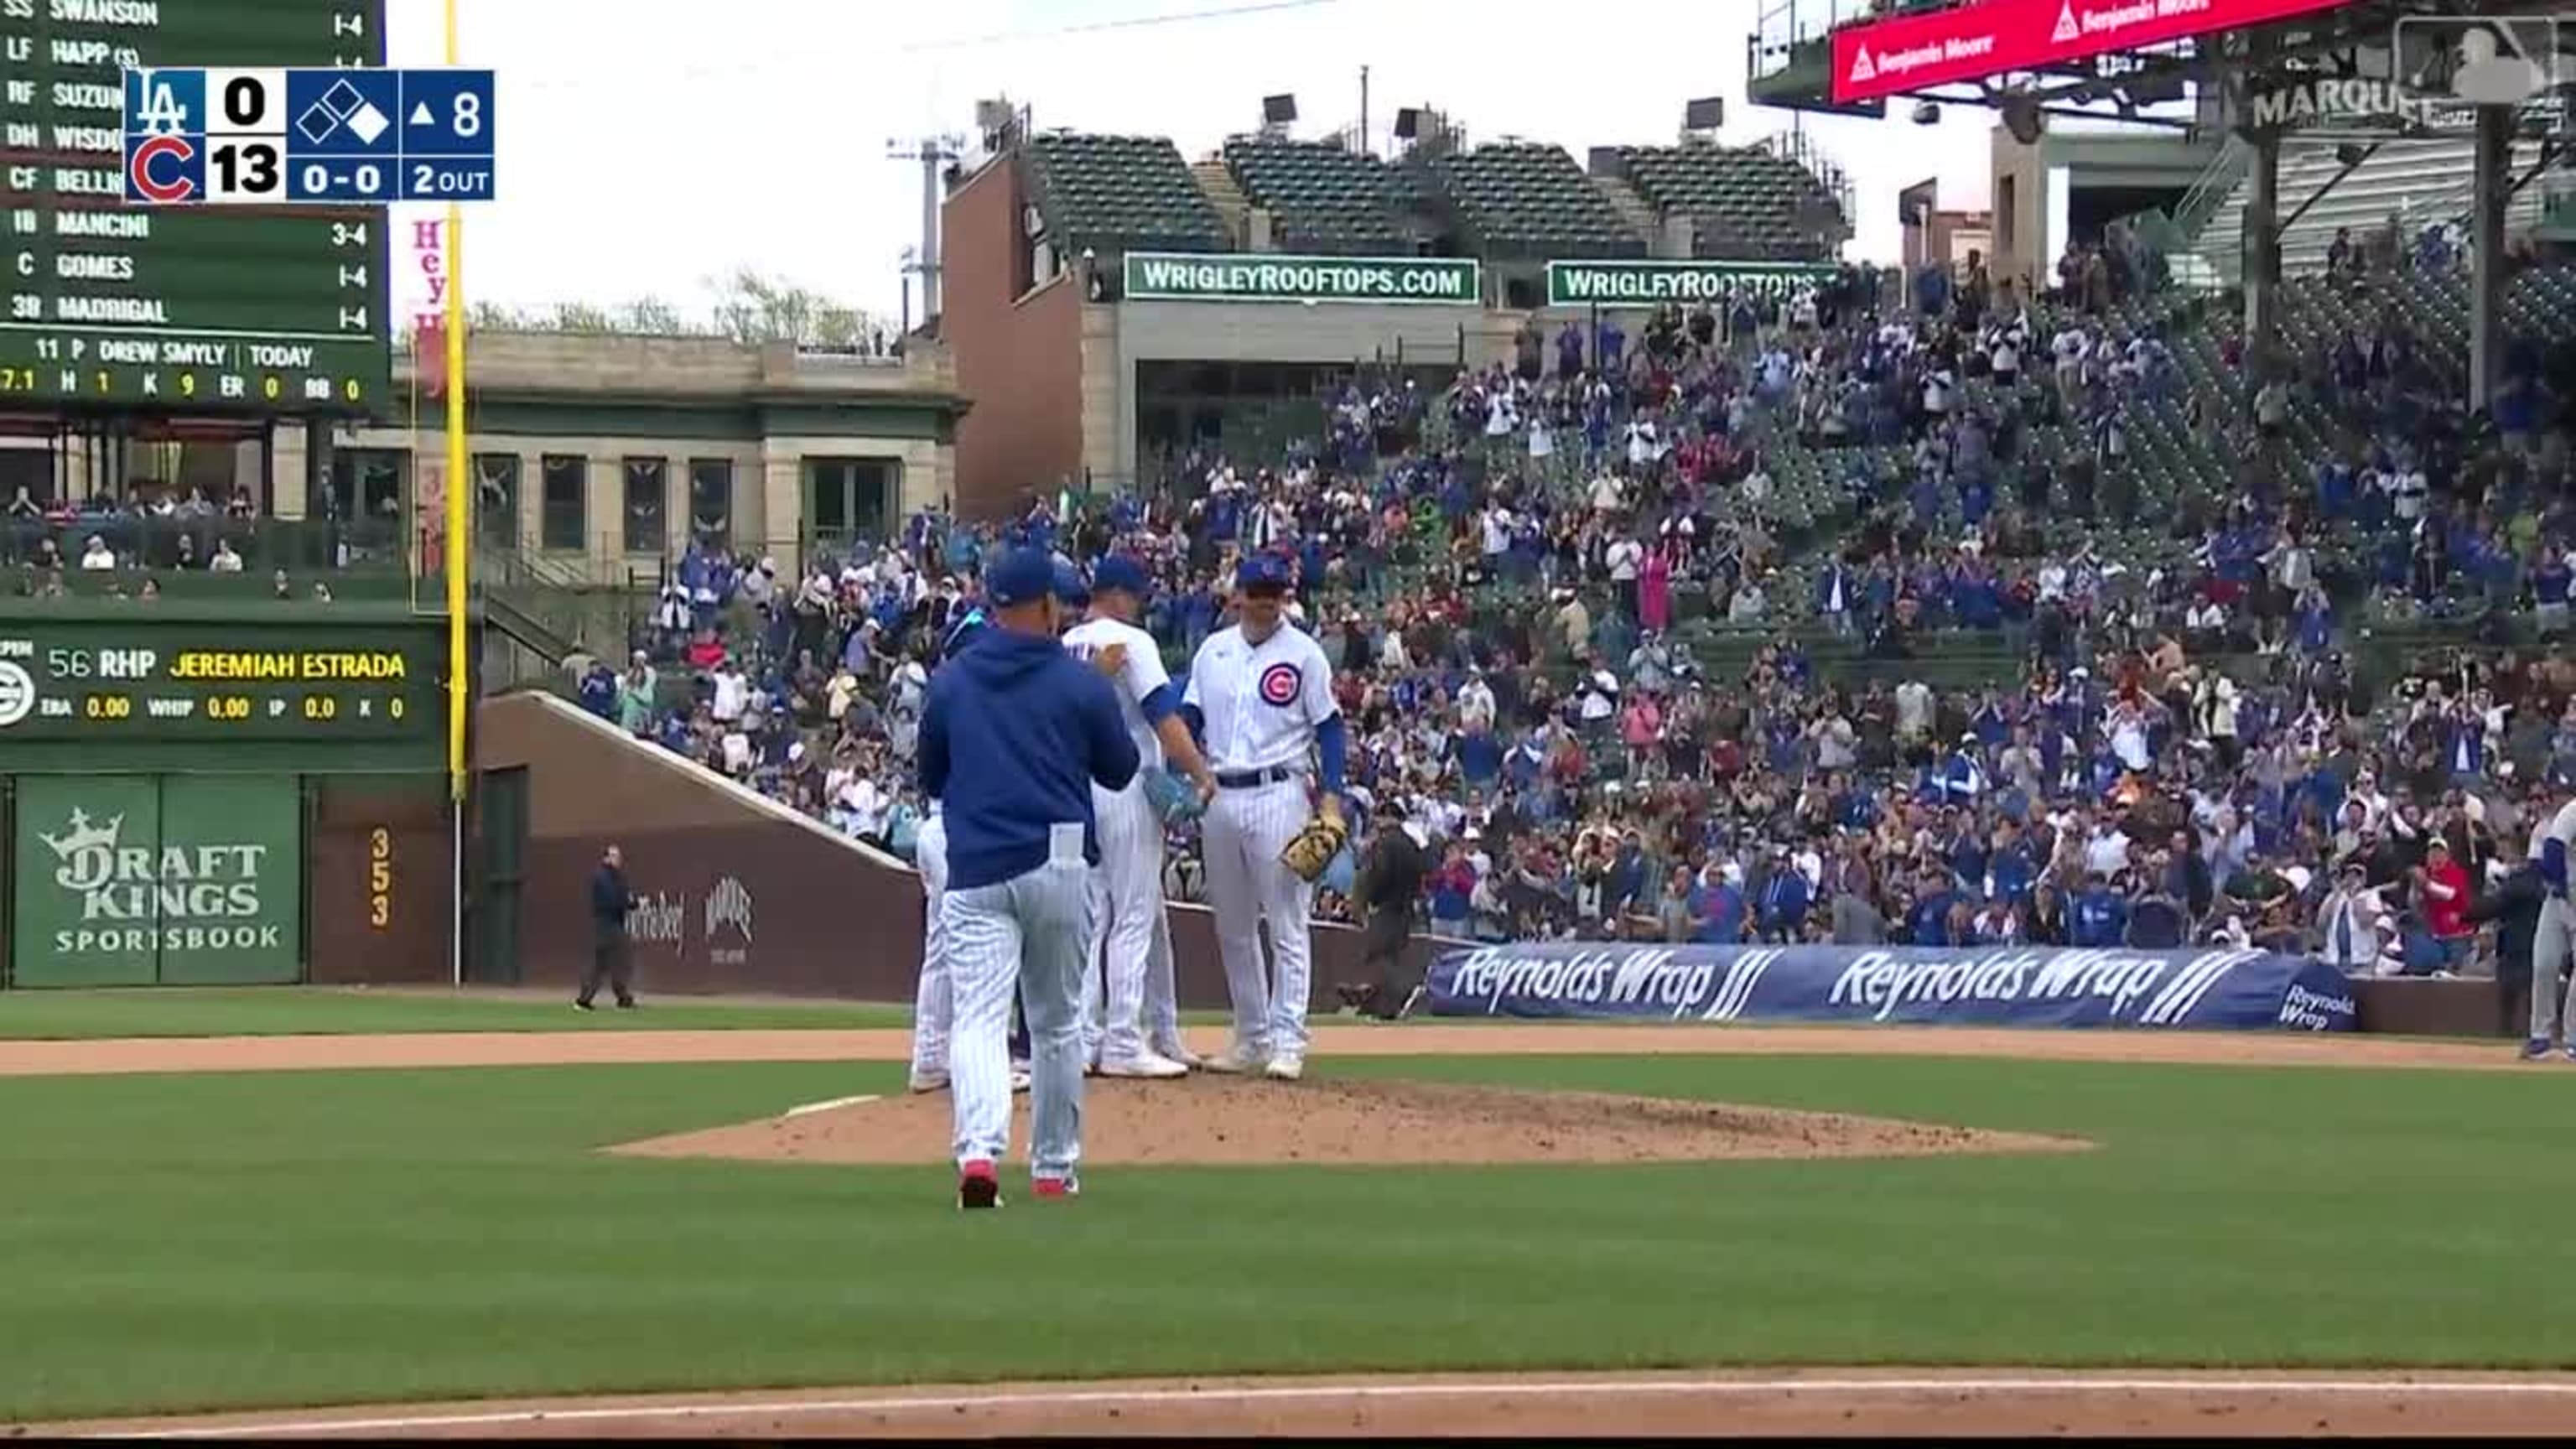 Drew Smyly's perfect game bid ends in agonizing fashion for Cubs